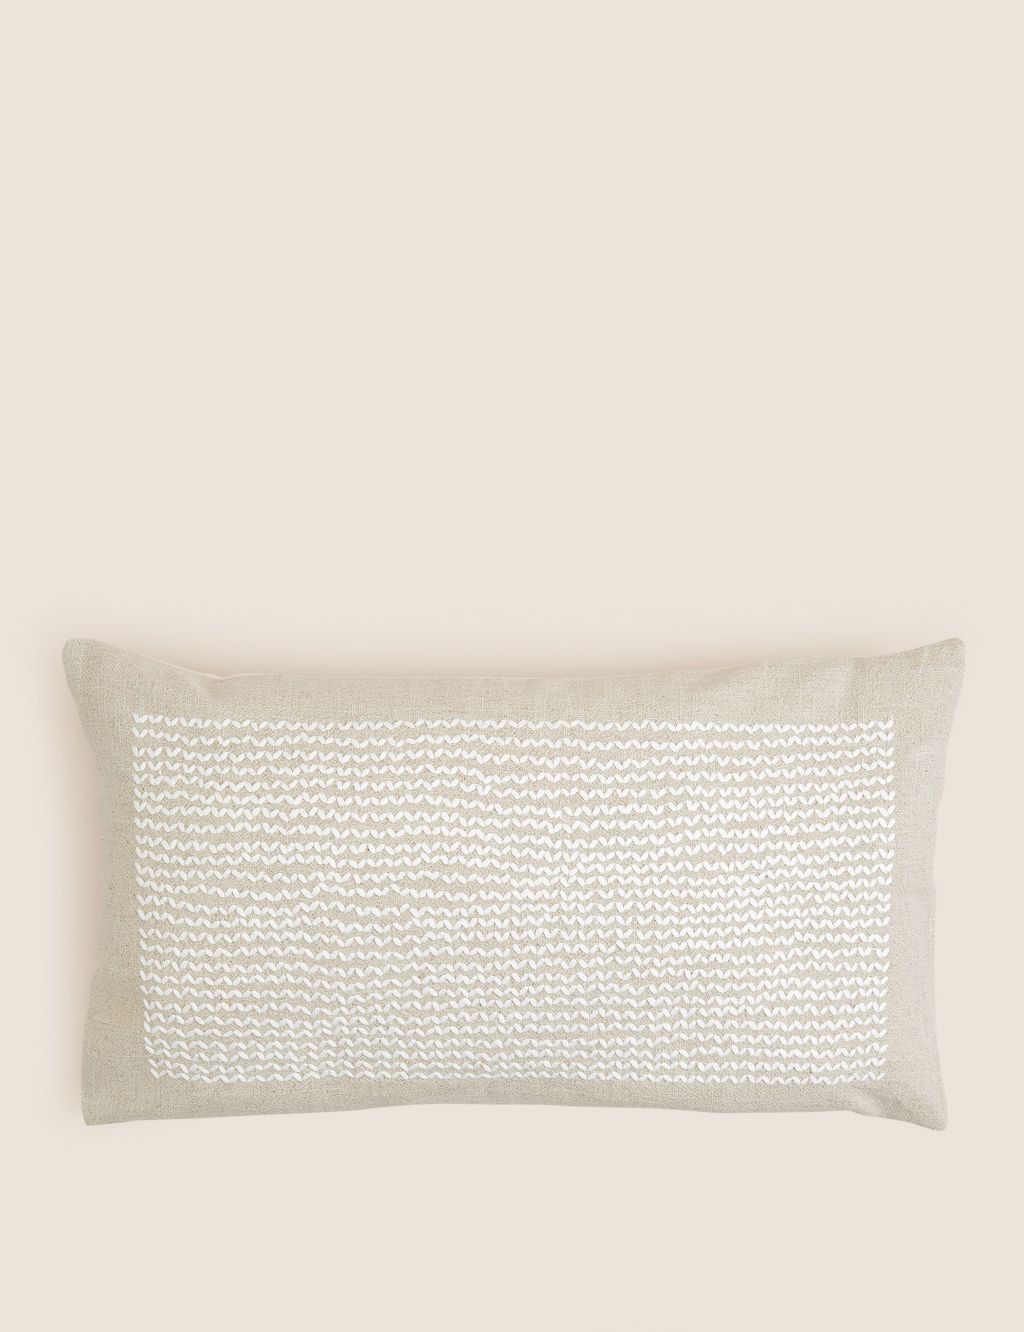 Cotton with Linen Bolster Cushion image 1